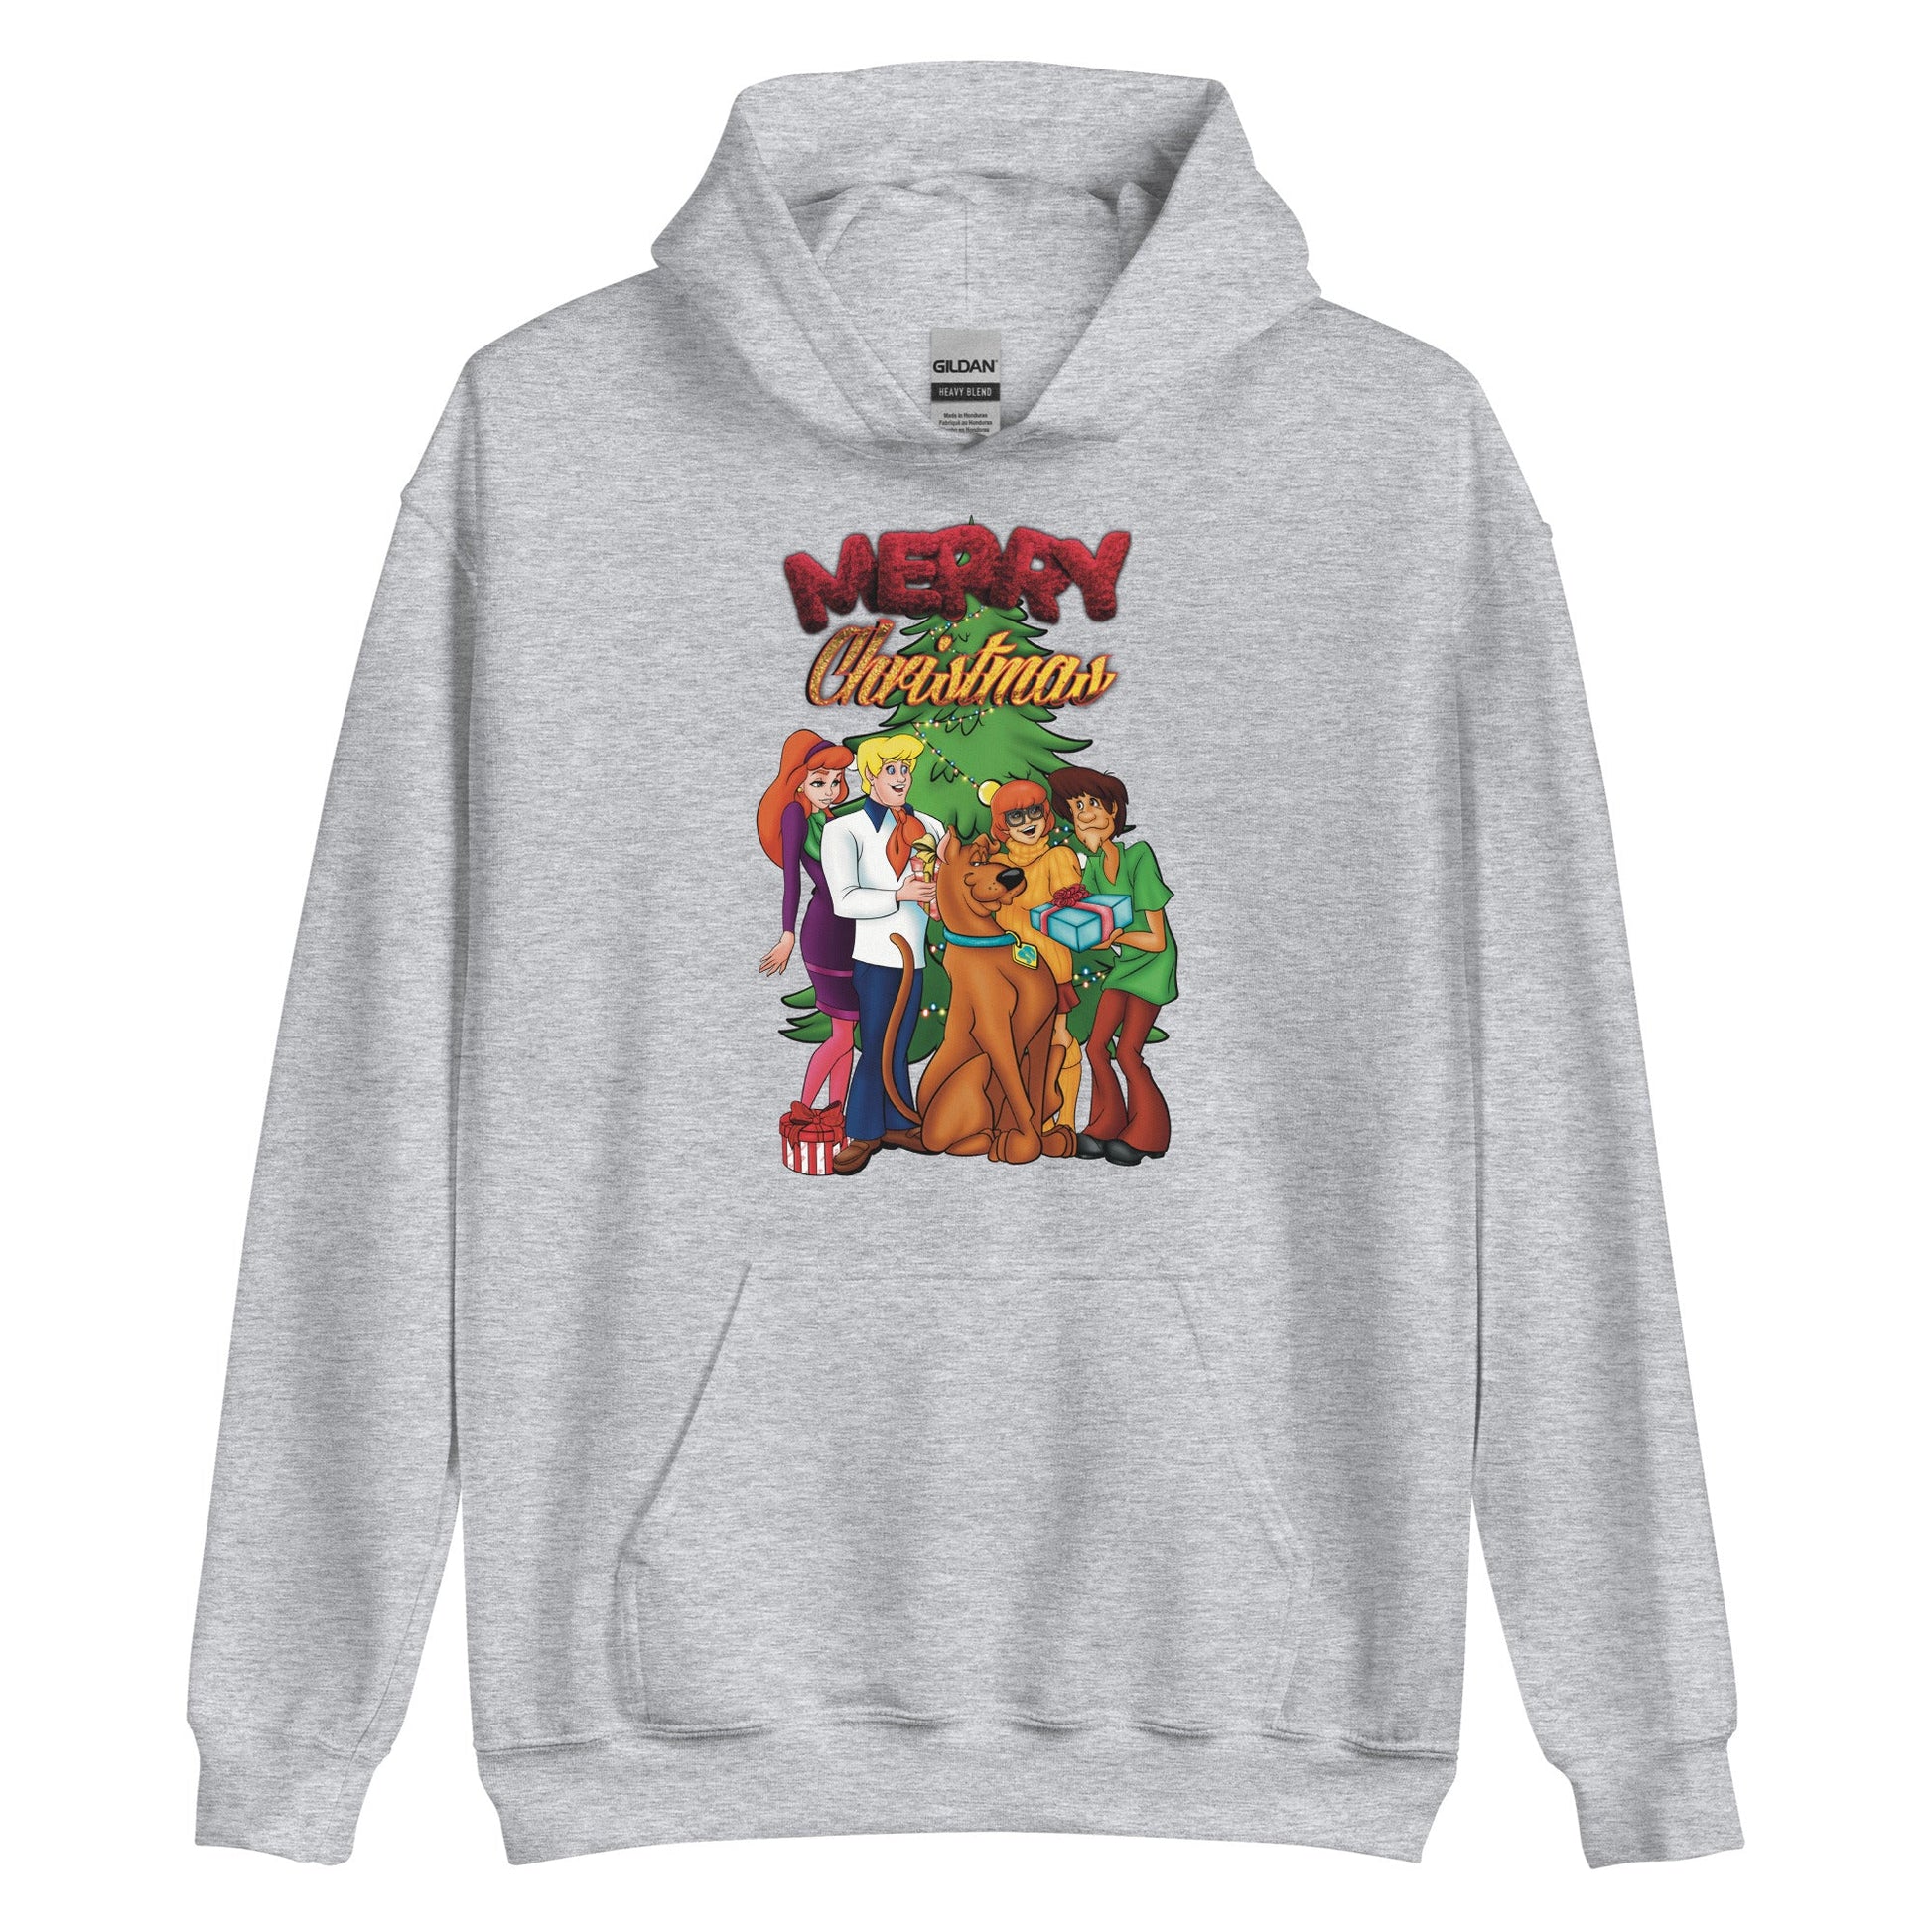 Scooby Doo and Friends Merry Christmas Unisex Hoodie - smuniqueshirts